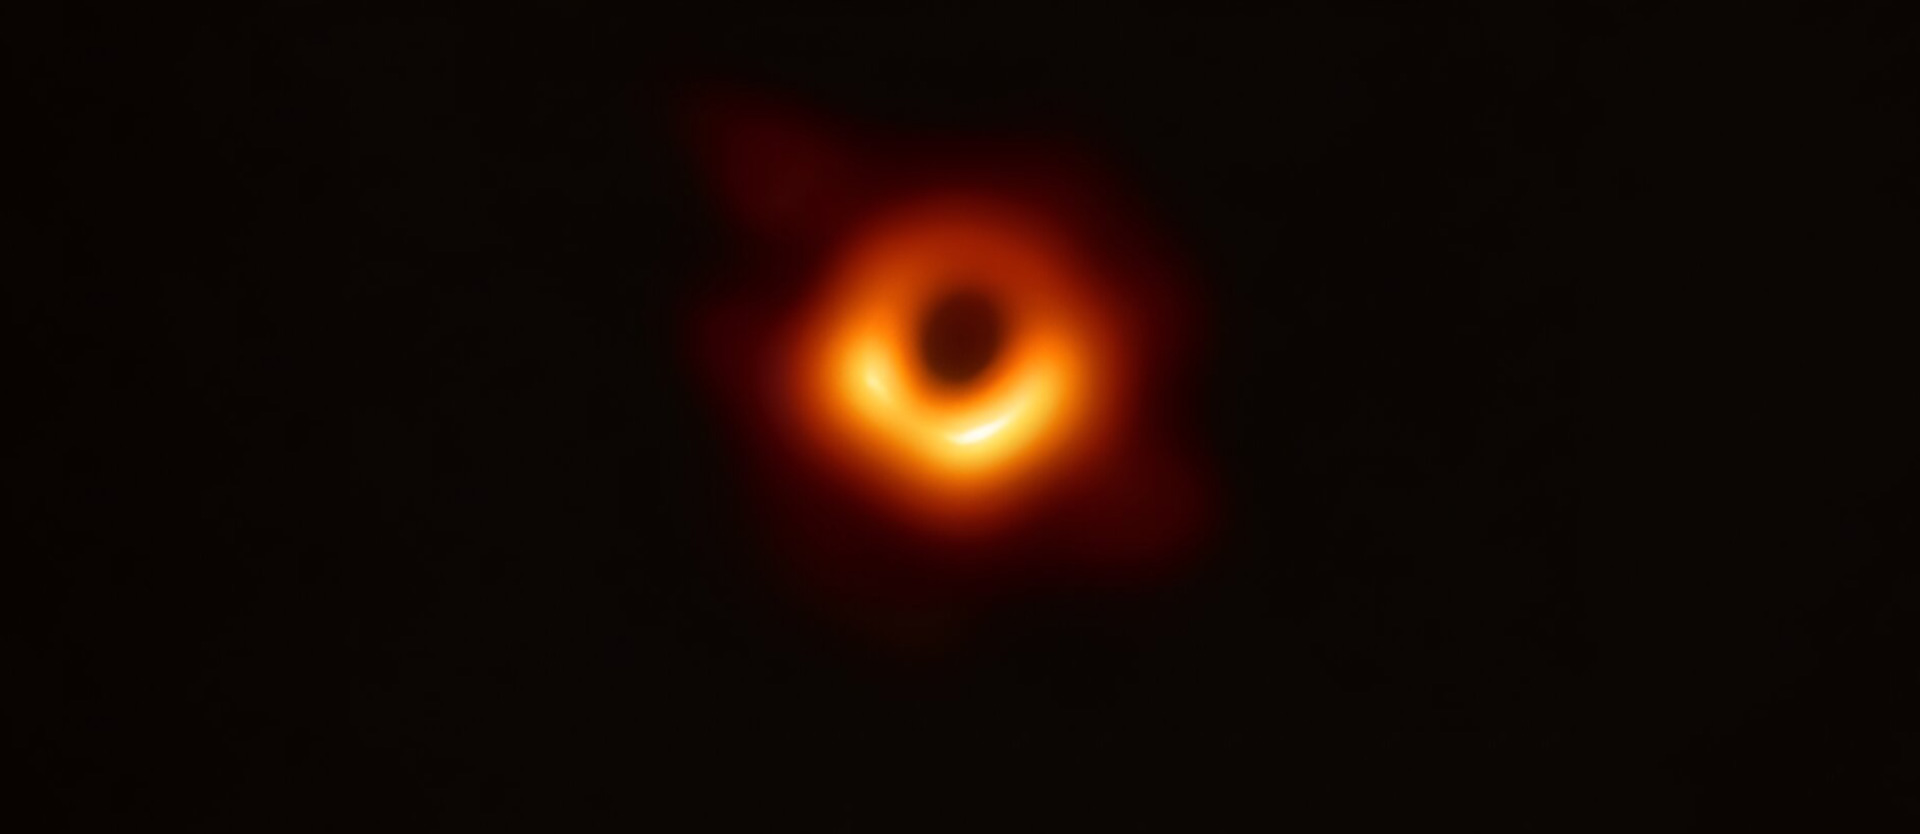   The hungriest black hole in the universe.